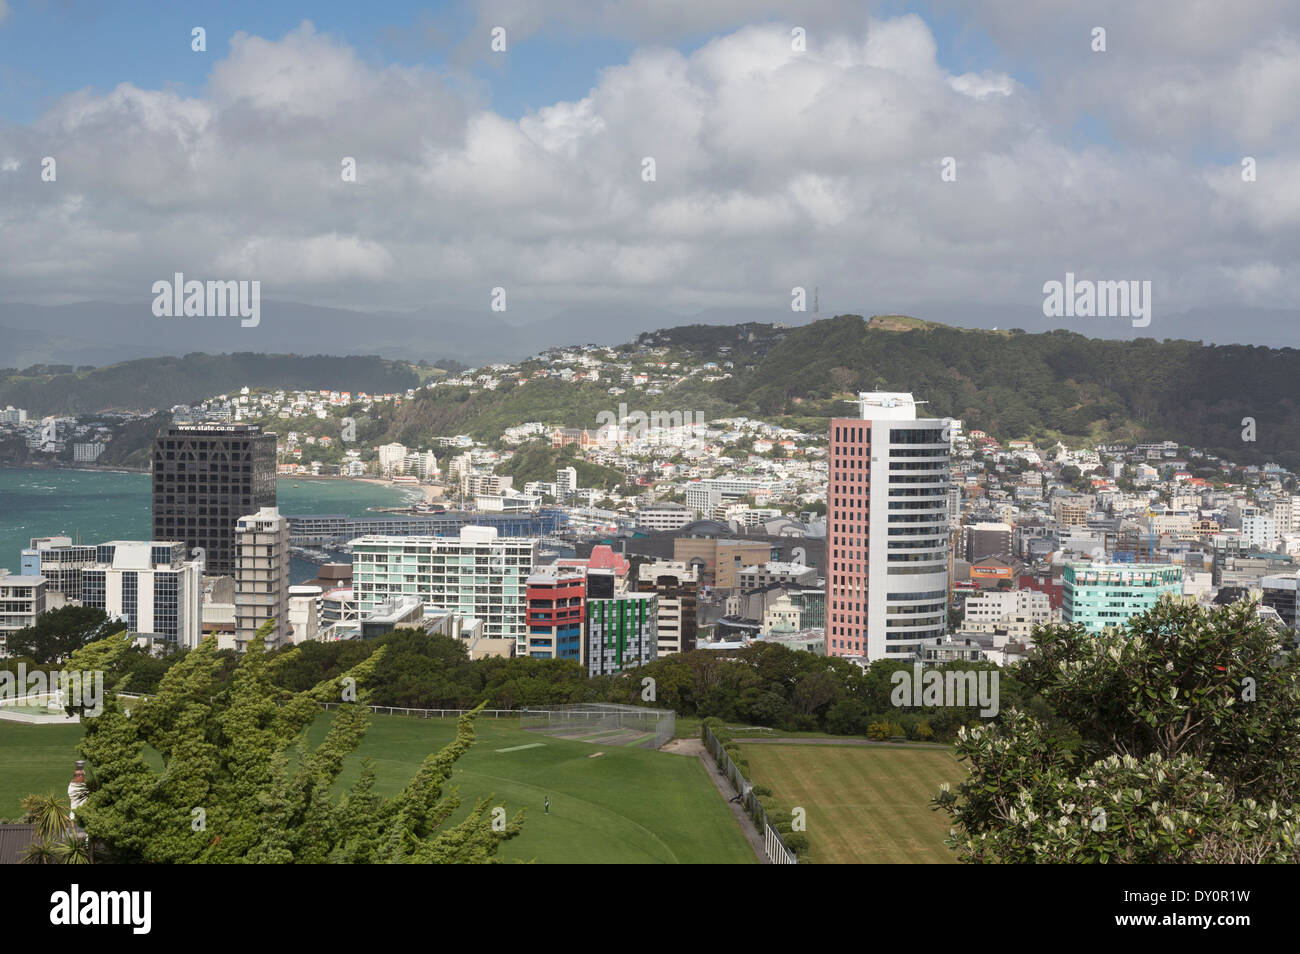 Wellington, New Zealand - cityscape of downtown skyscrapers and office buildings in CBD financial district Stock Photo